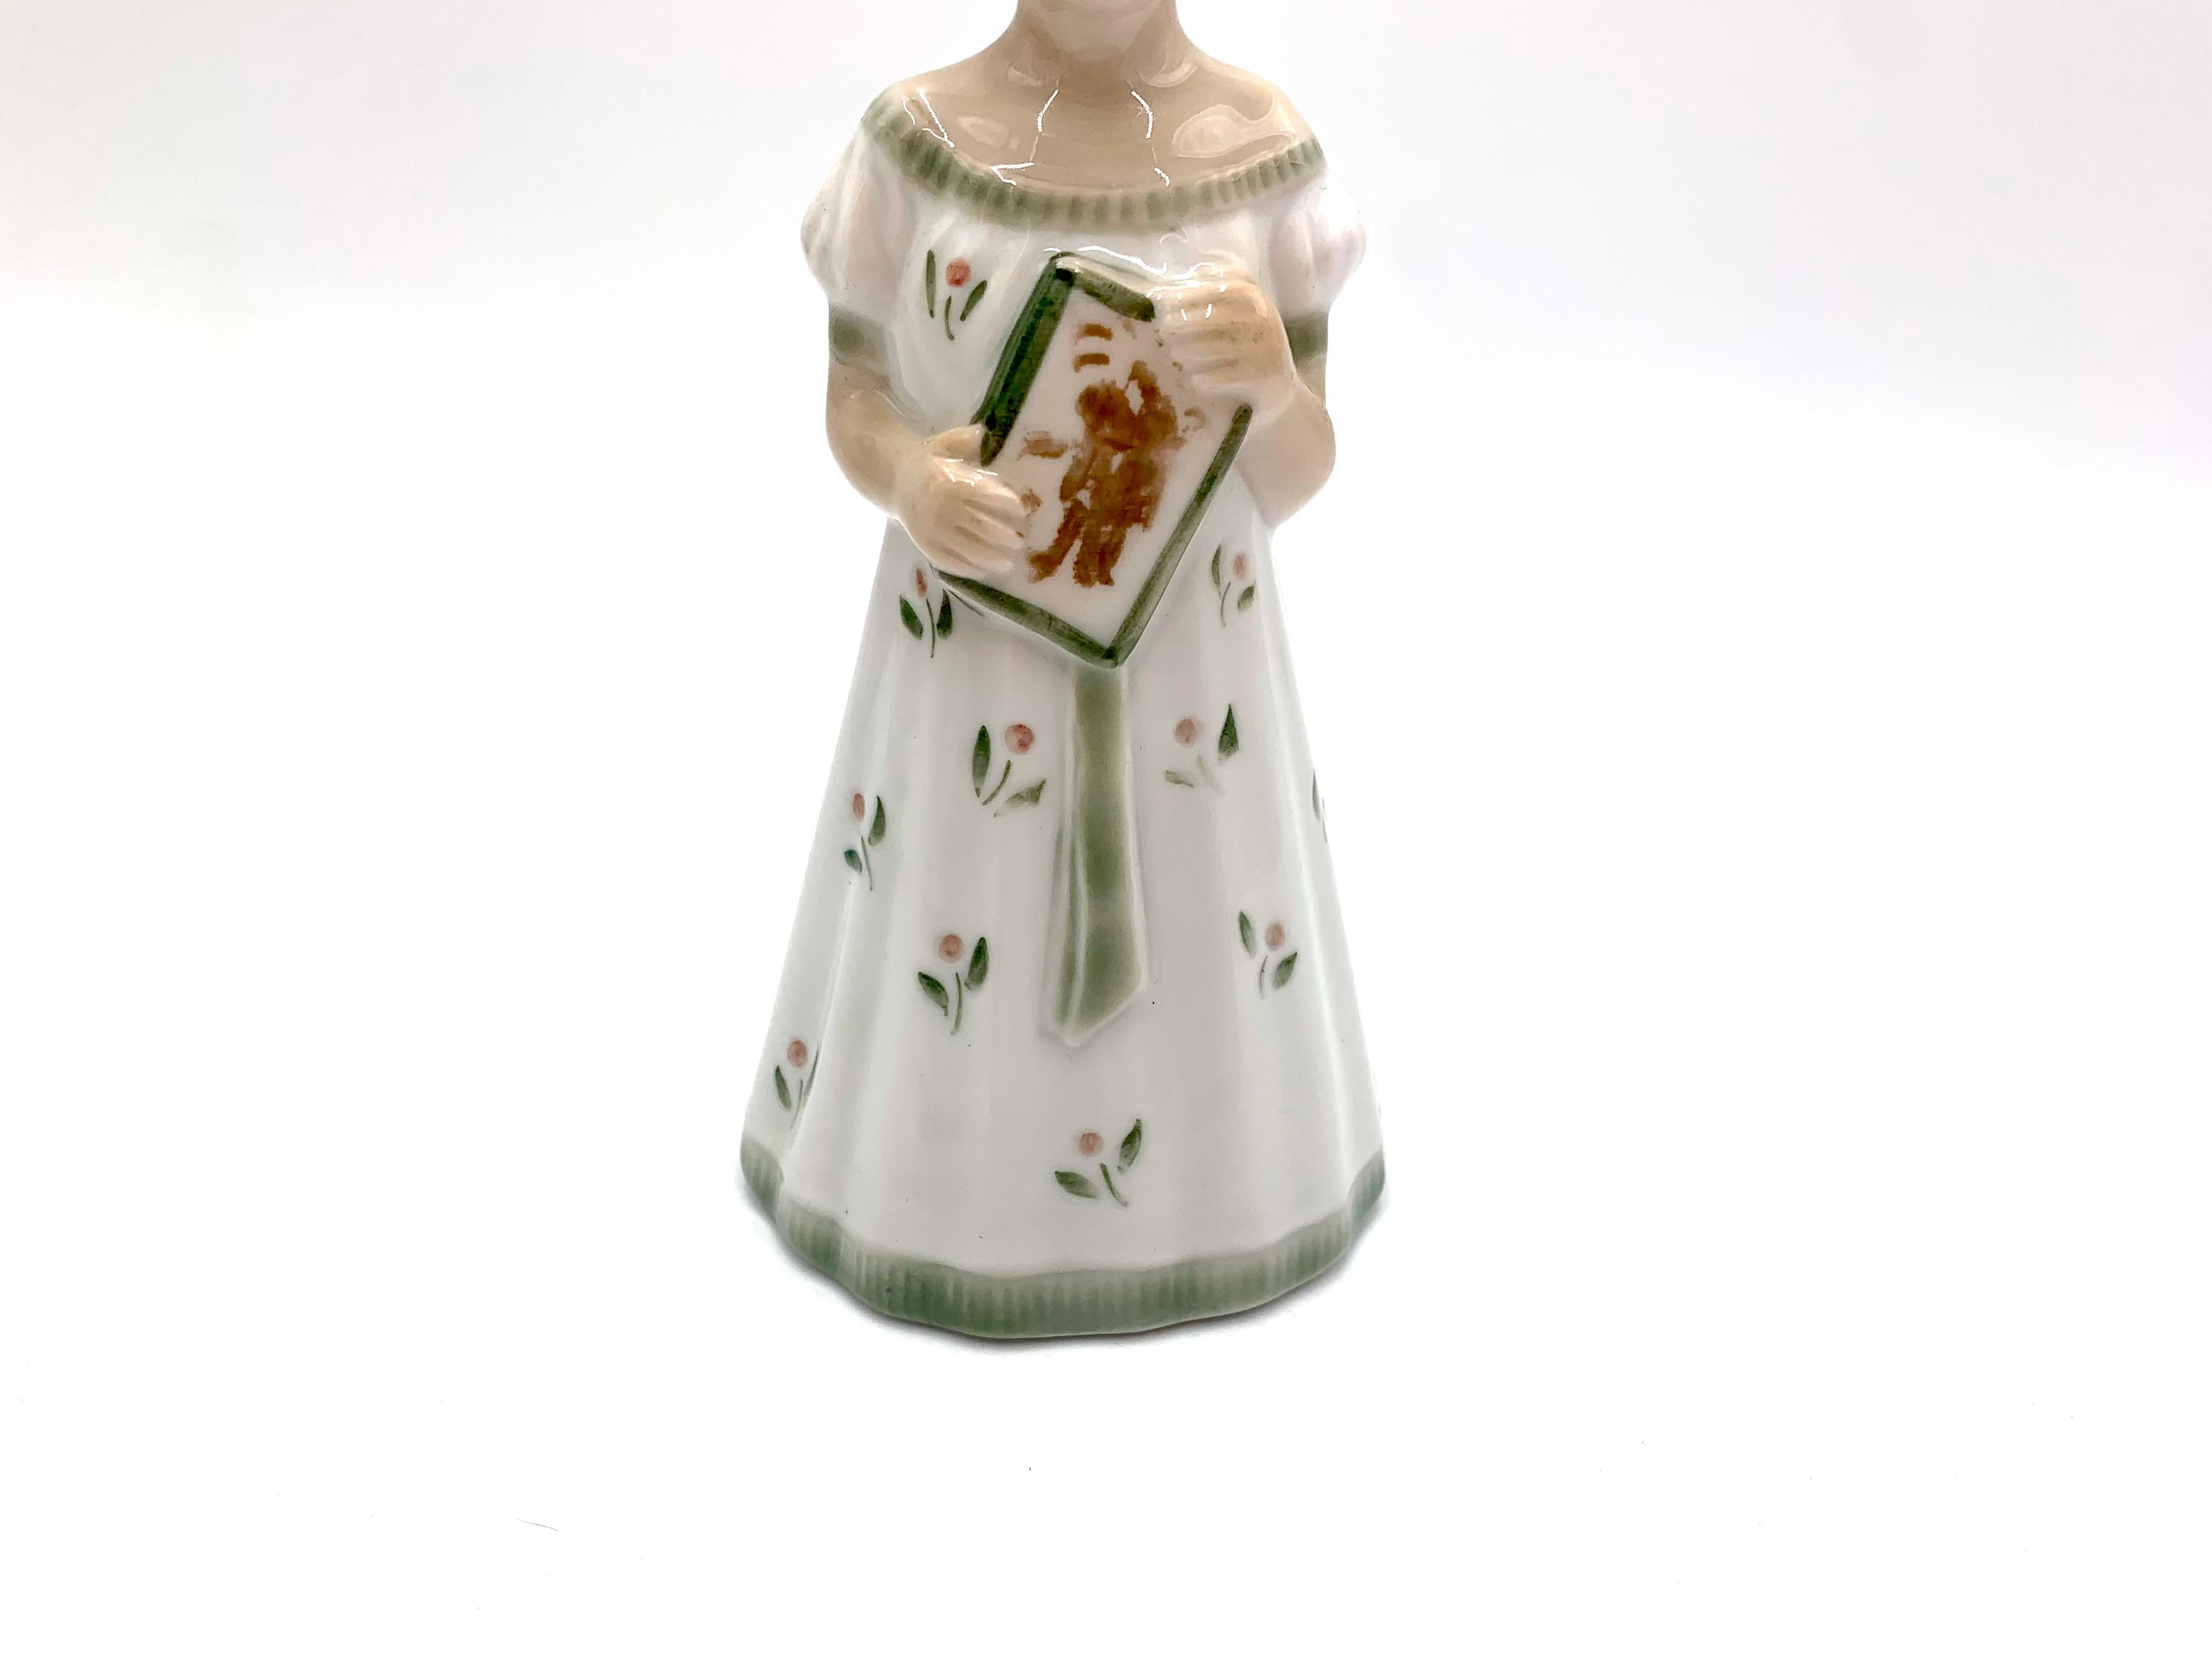 20th Century Porcelain Figurine of a Woman with a Book, Lyngby, Denmark, 1960s